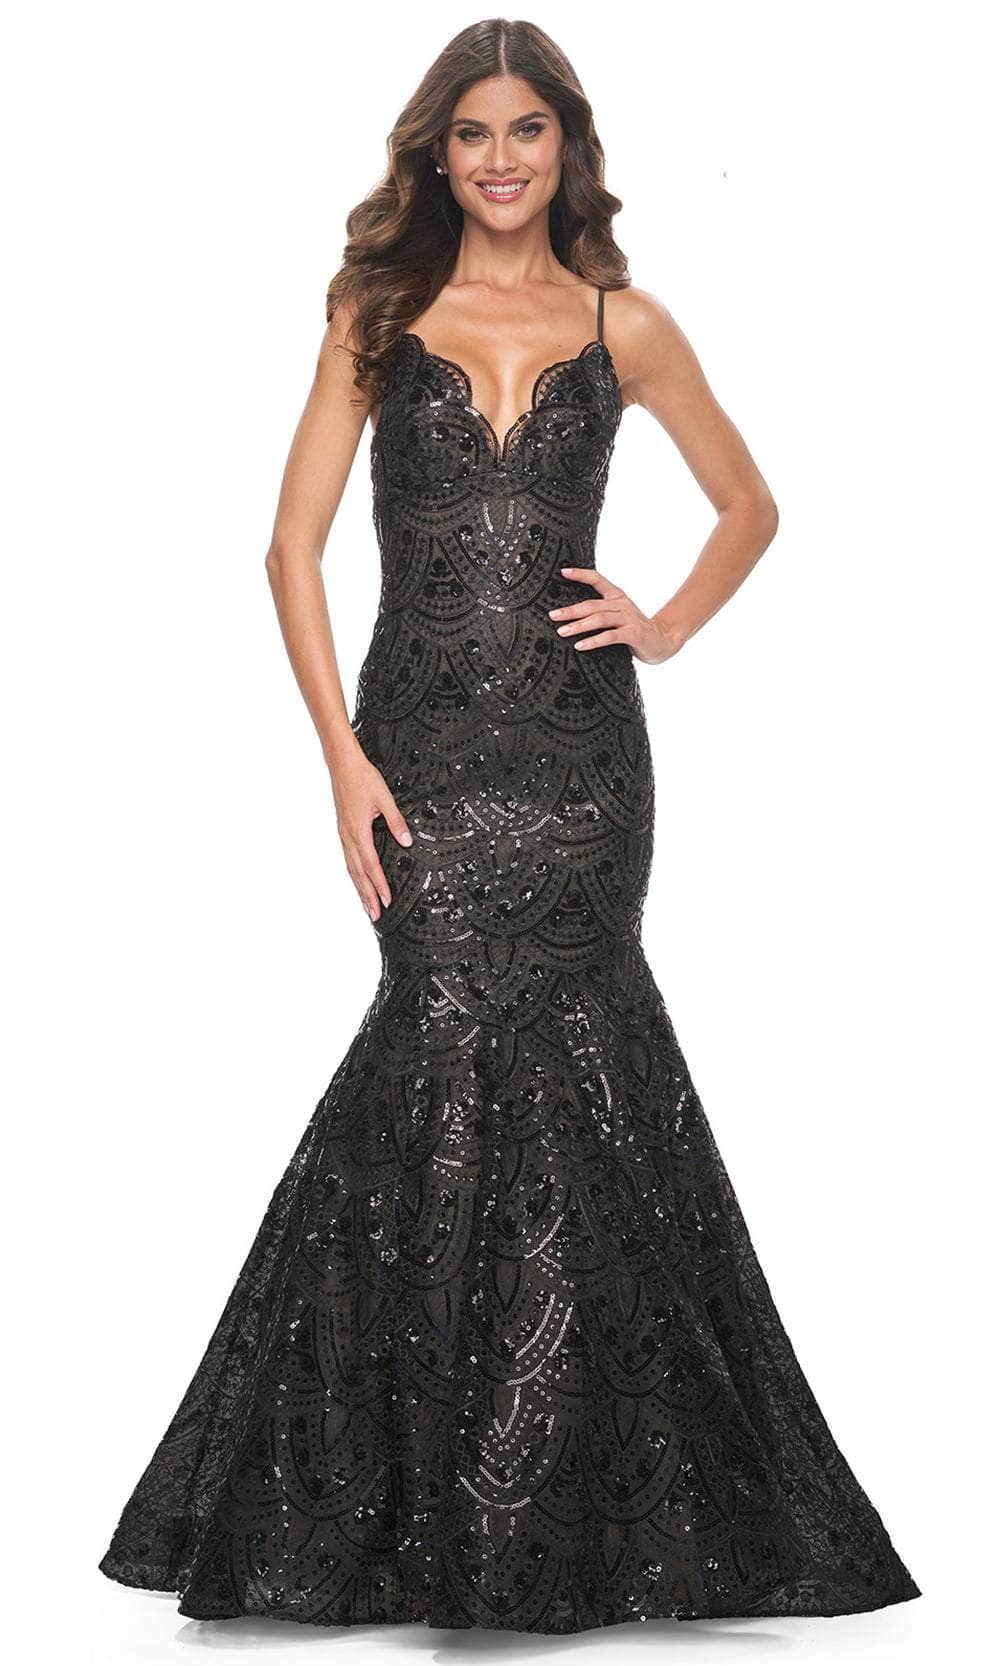 La Femme 32118 - Scallop Detailed Mermaid Prom Gown Prom Dresses 00 / Black